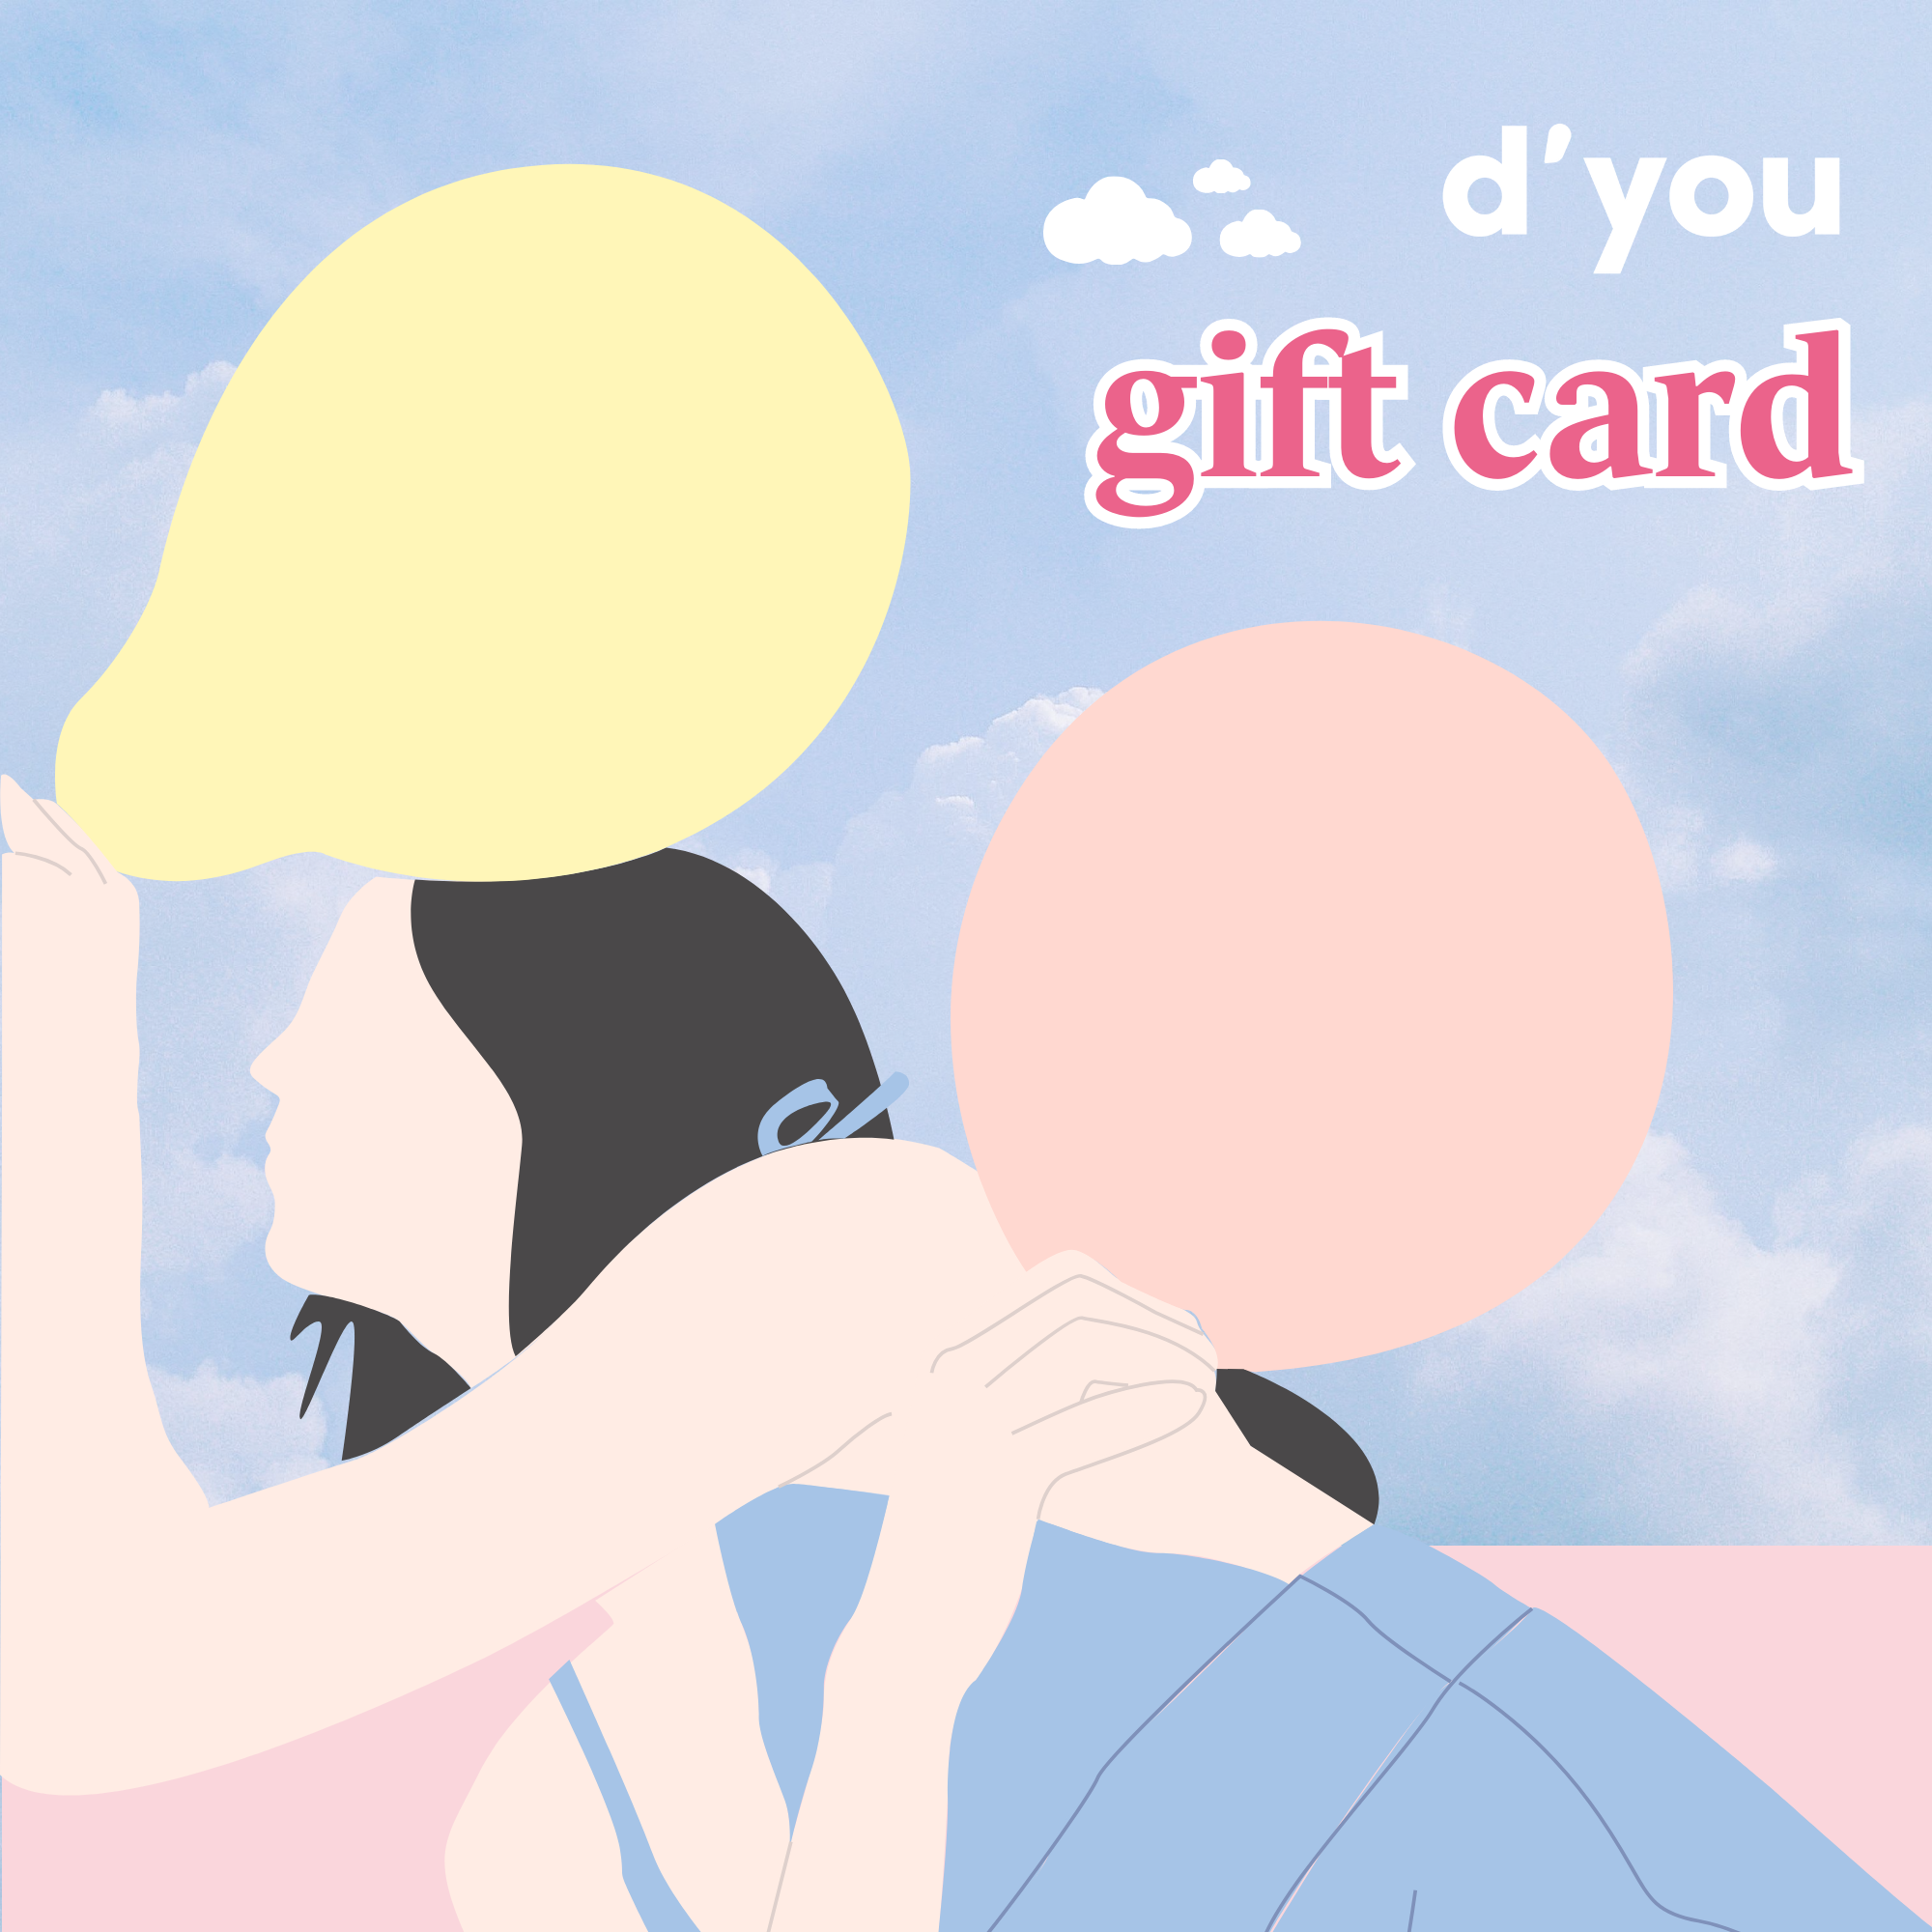 d'you gift card-2